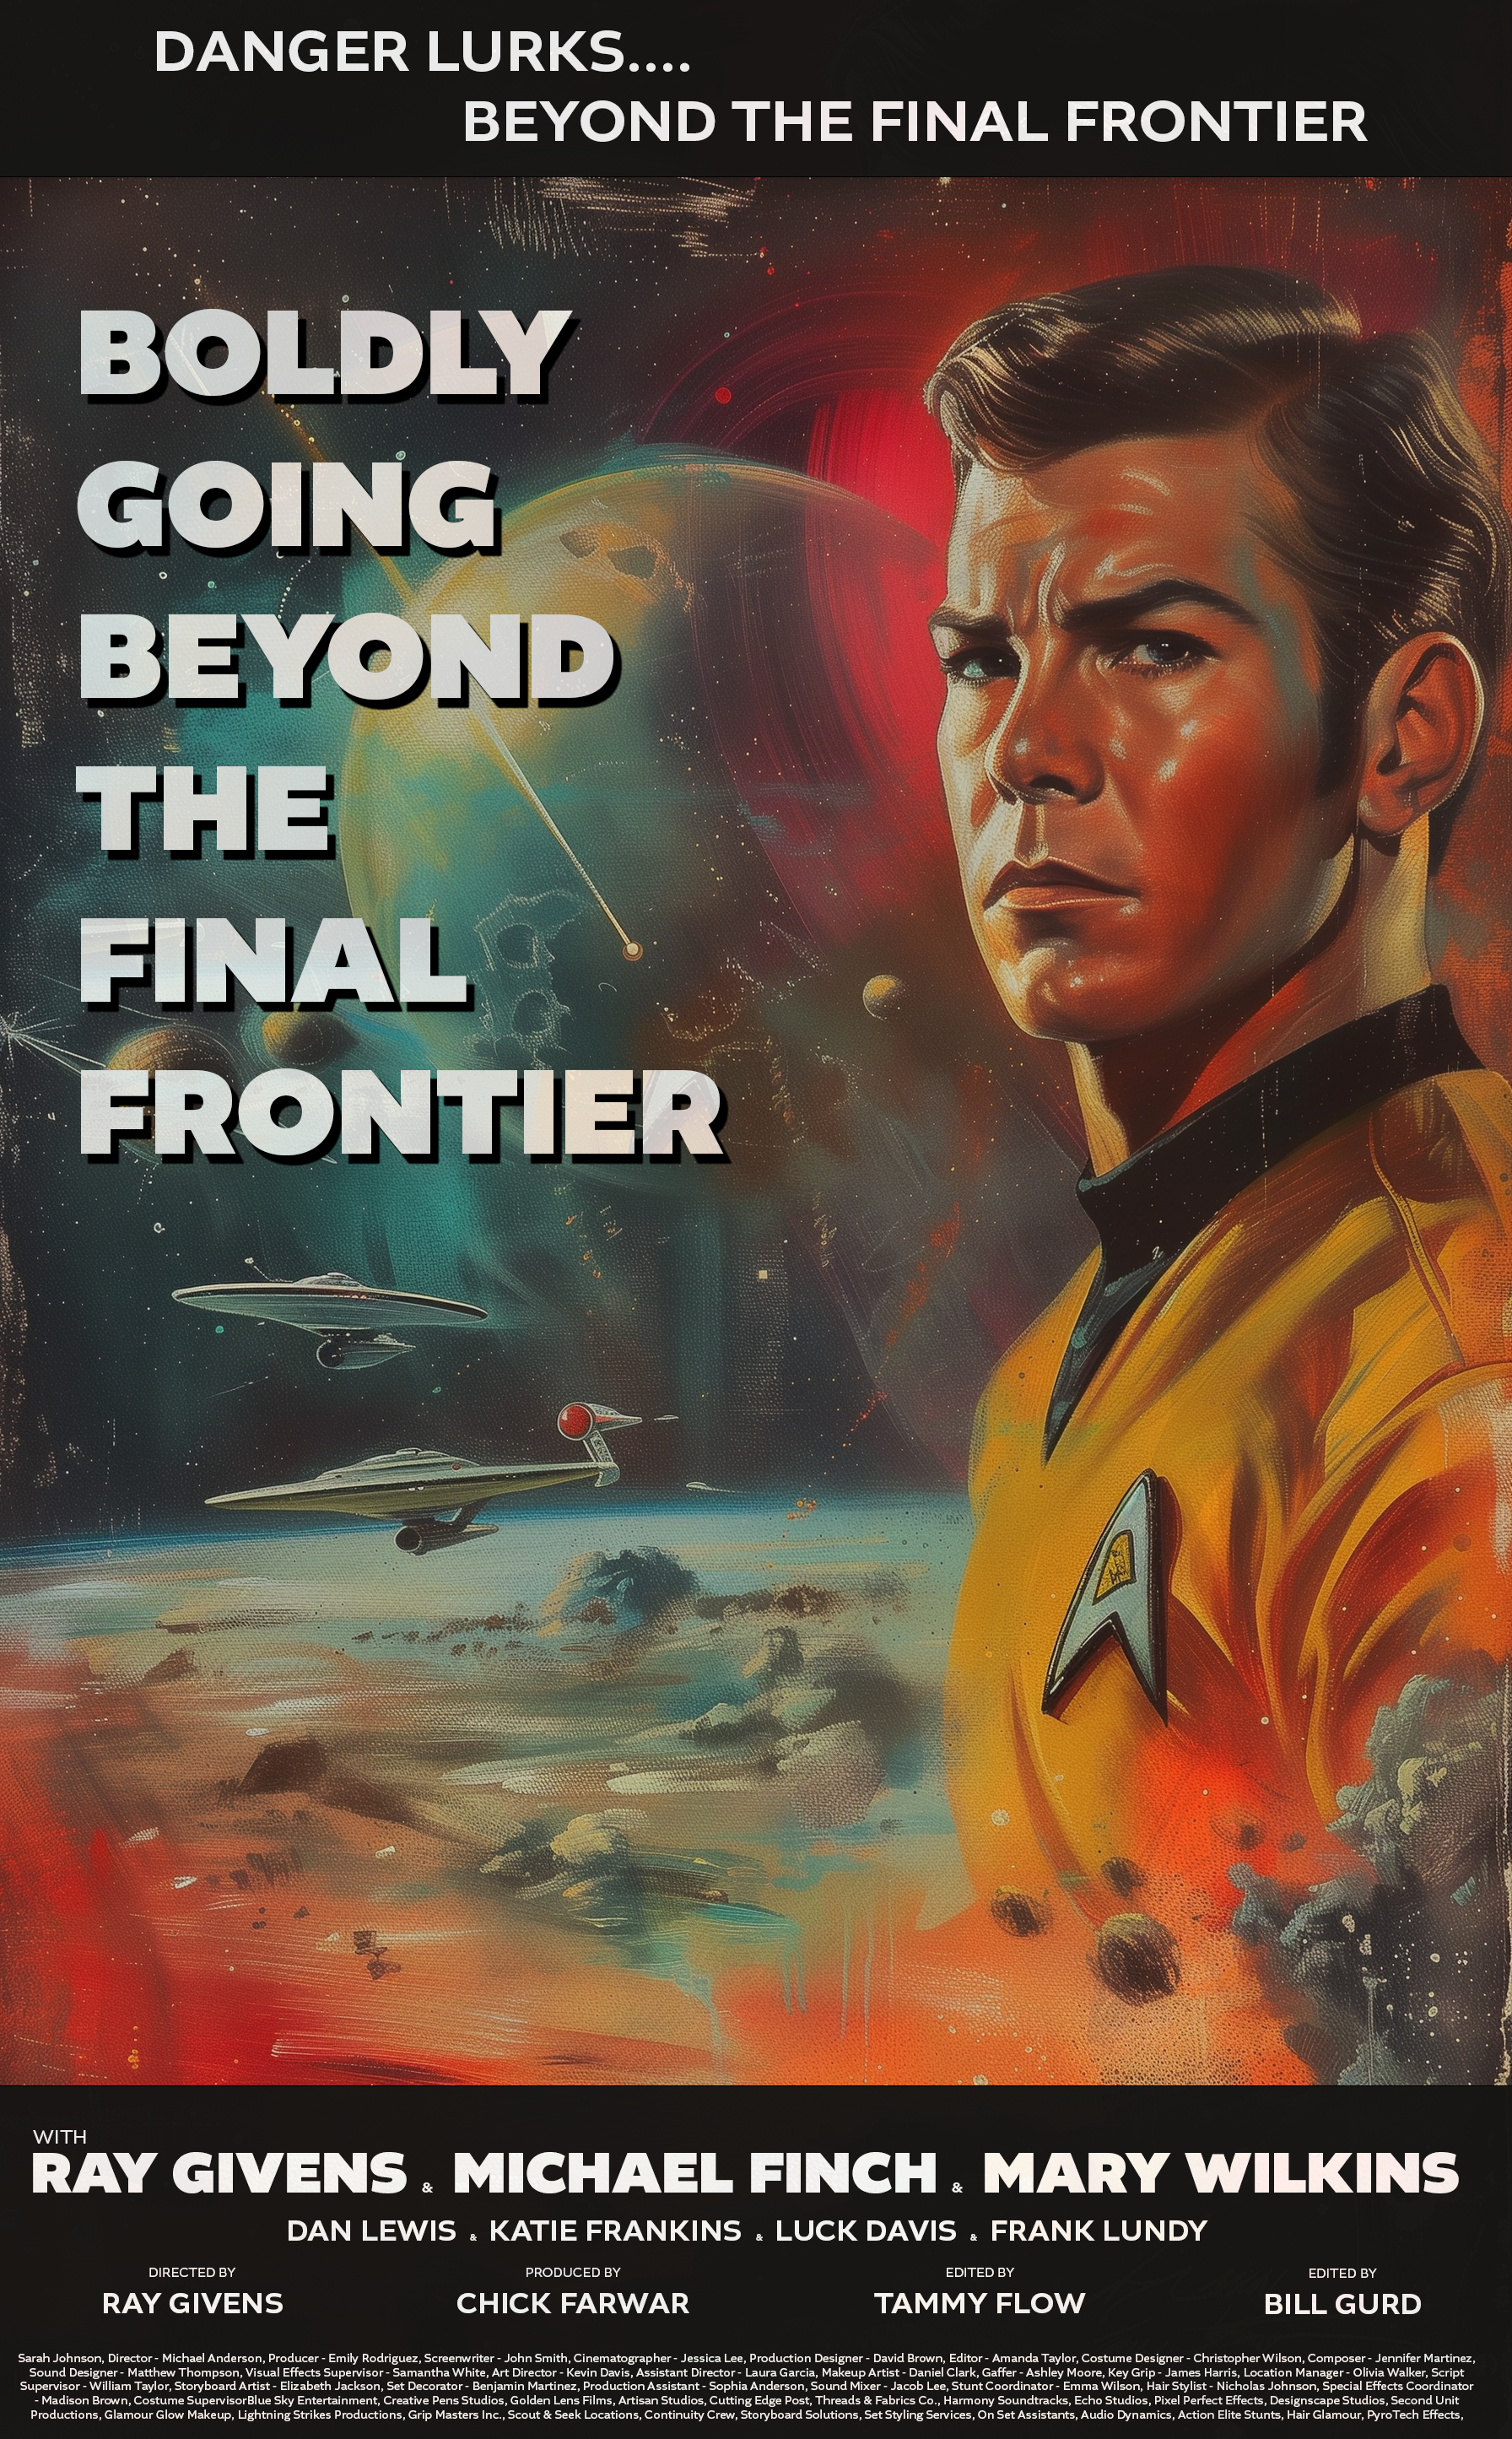 Name:  Beyond the Final Frontier.png
Views: 200
Size:  8.19 MB